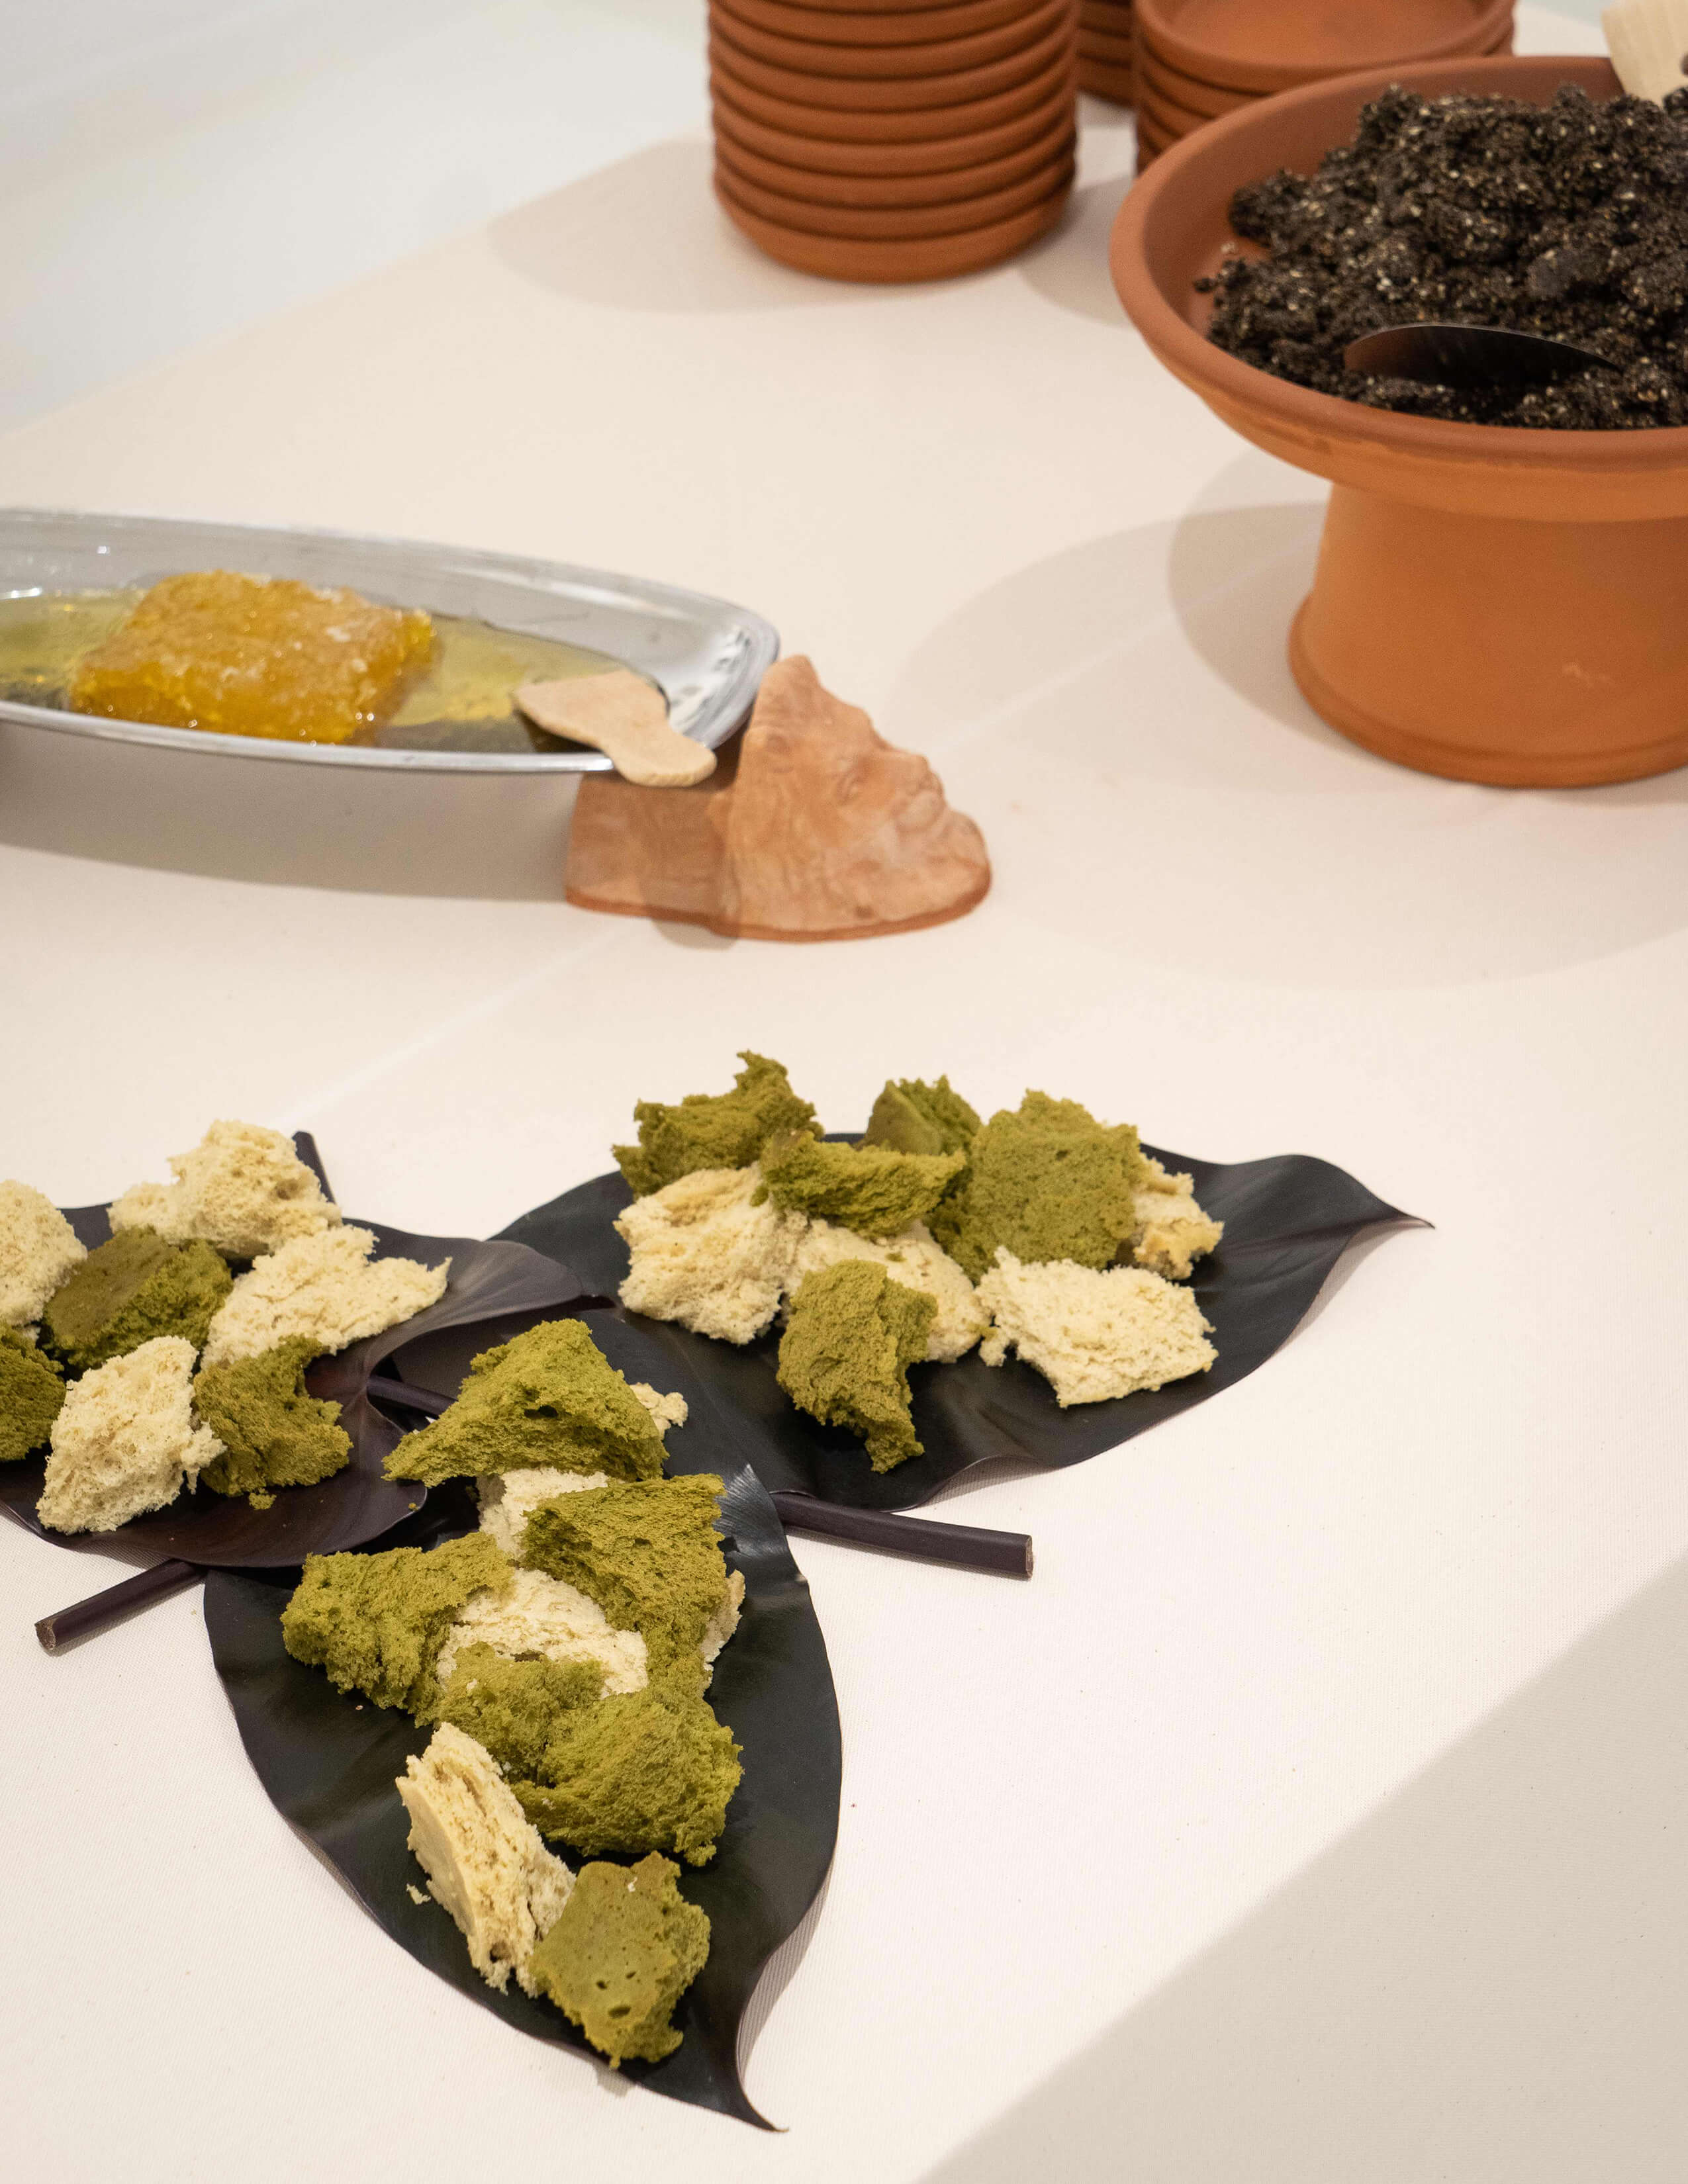 Pieces of ripped bread in green and cream colour served on three dark colour leaves. A bowl of soil and a big chunk of honey-like thing served behind.